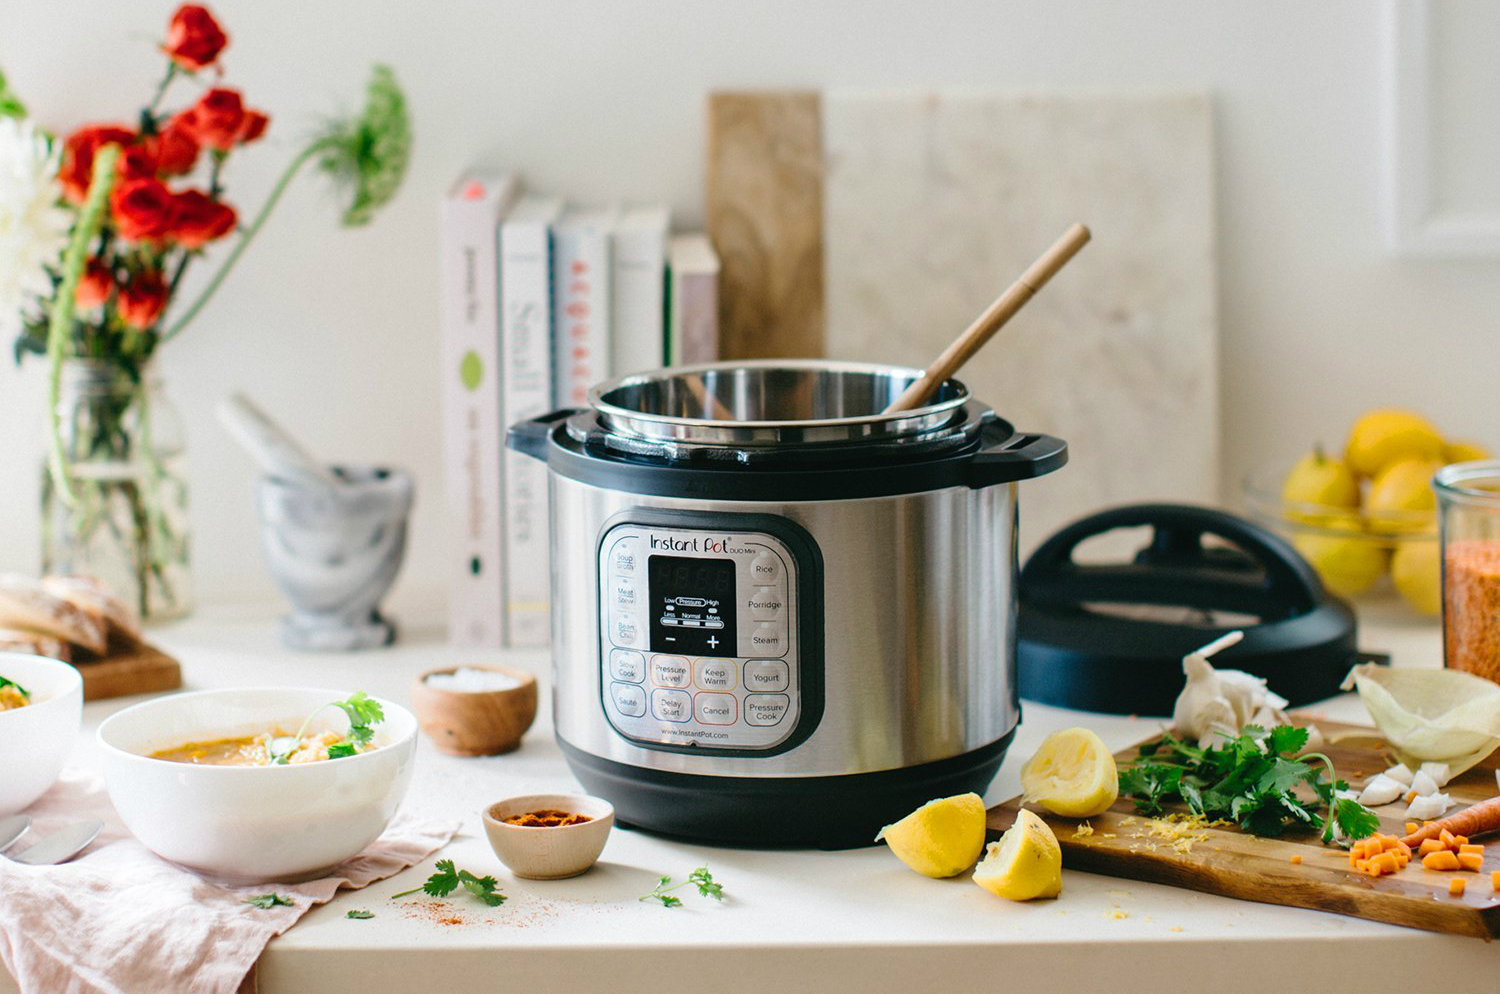 Instant Pot Duo 60 7-in-1 Review: A Classic For a Reason